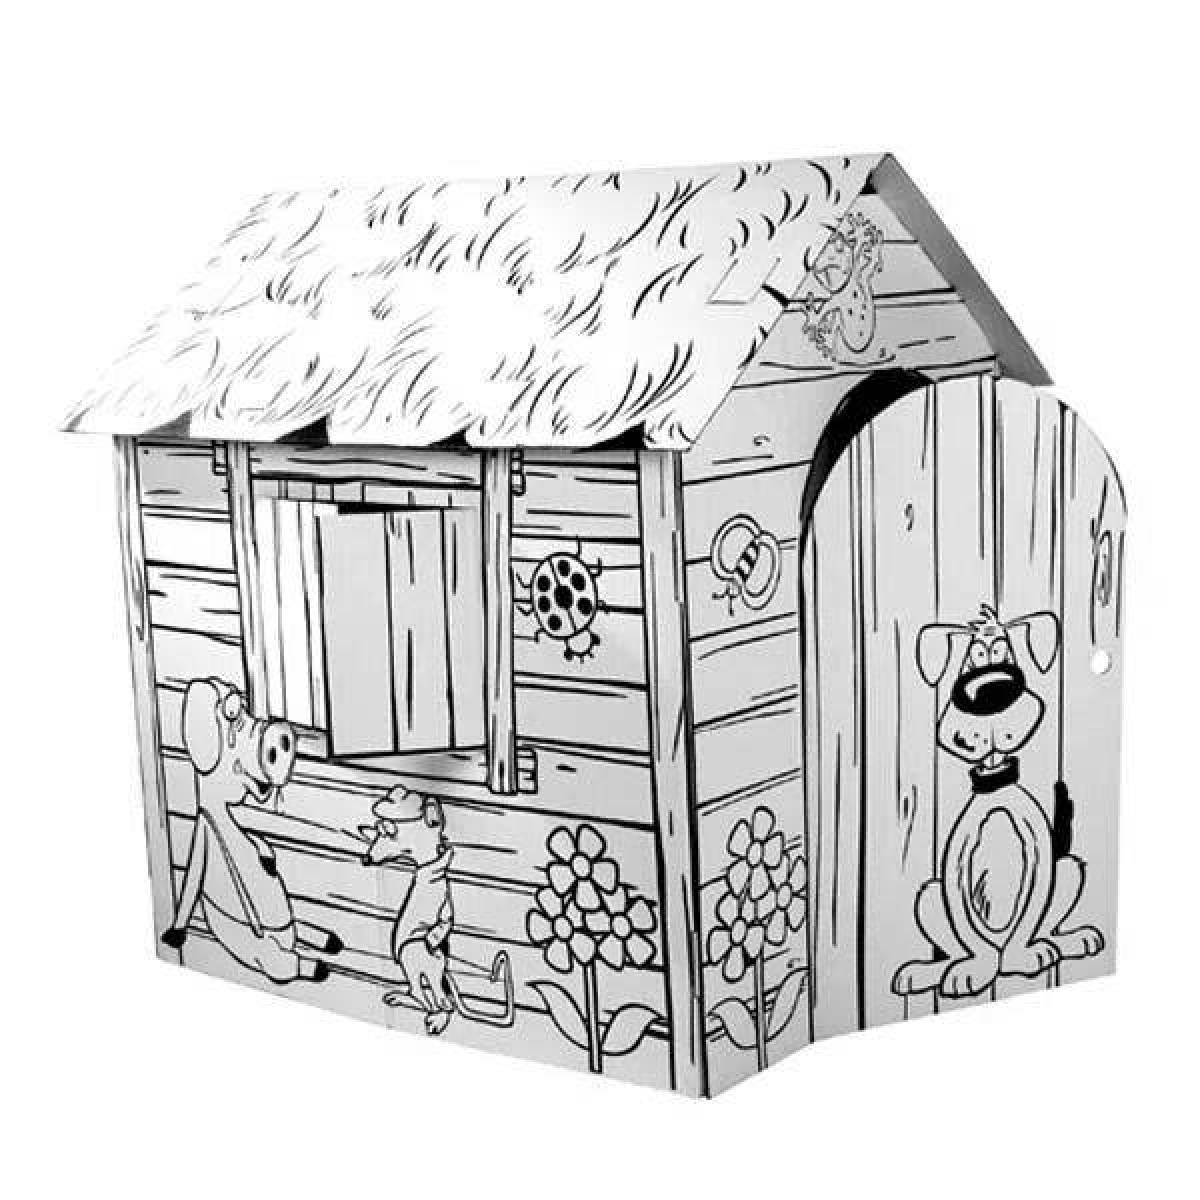 Coloring book for kids happy cardboard house